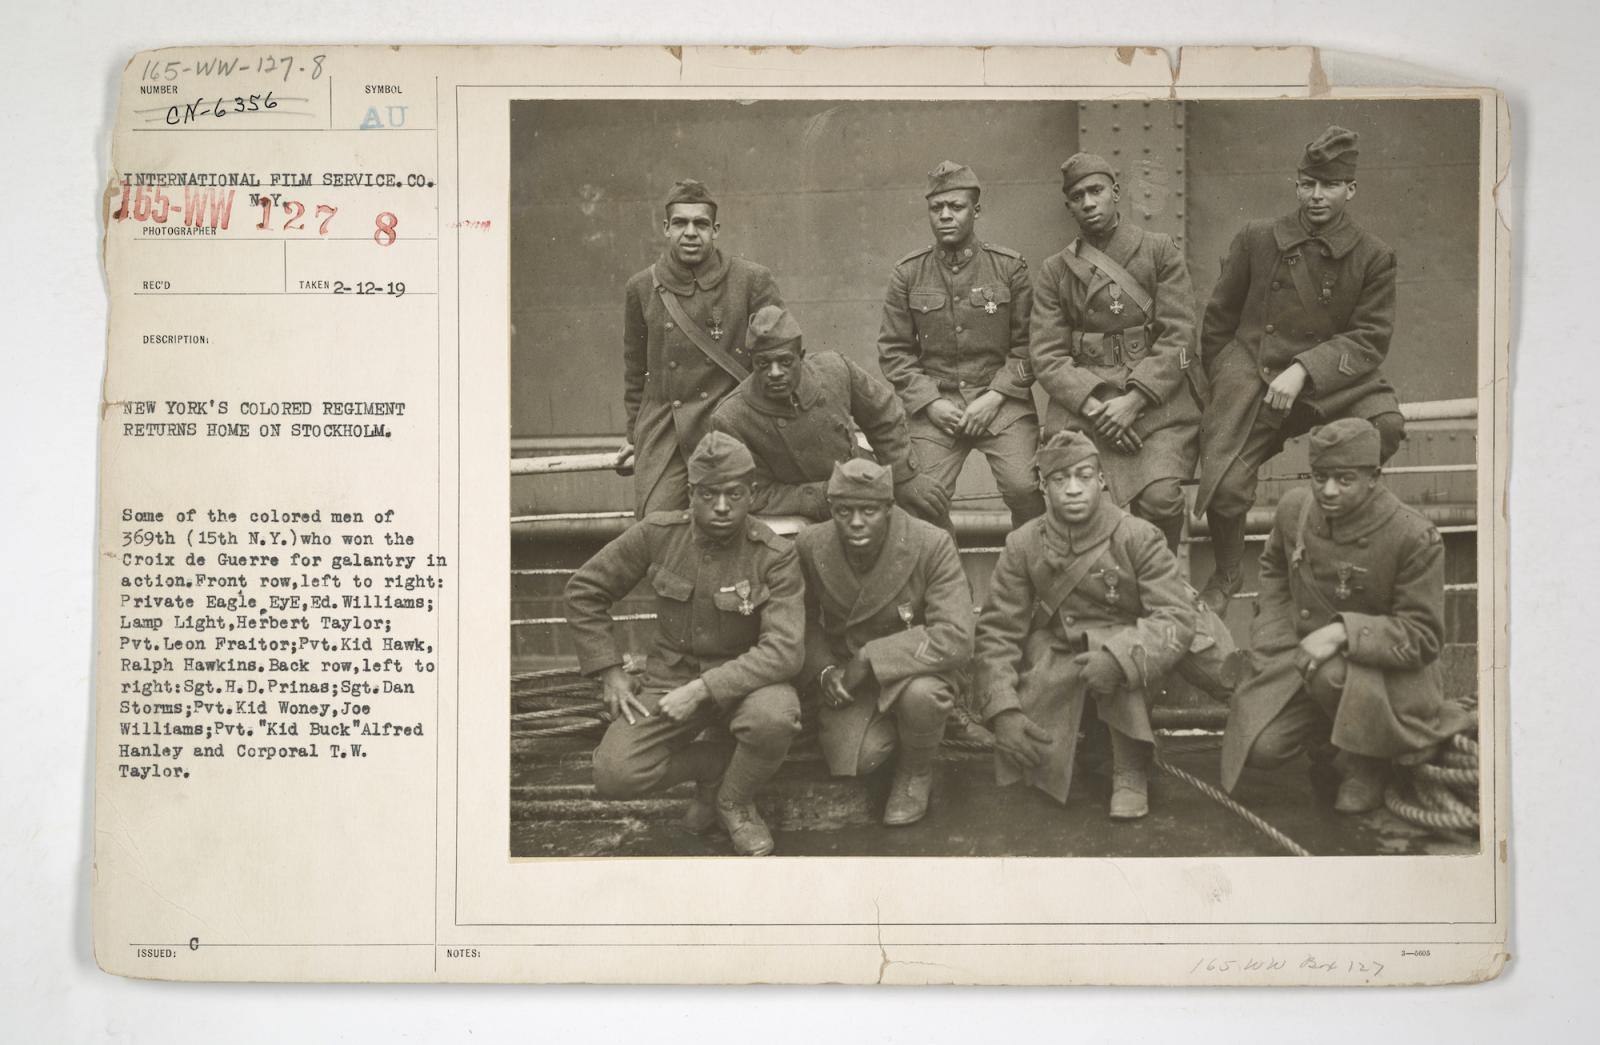 Black and white photo clipping of soldiers